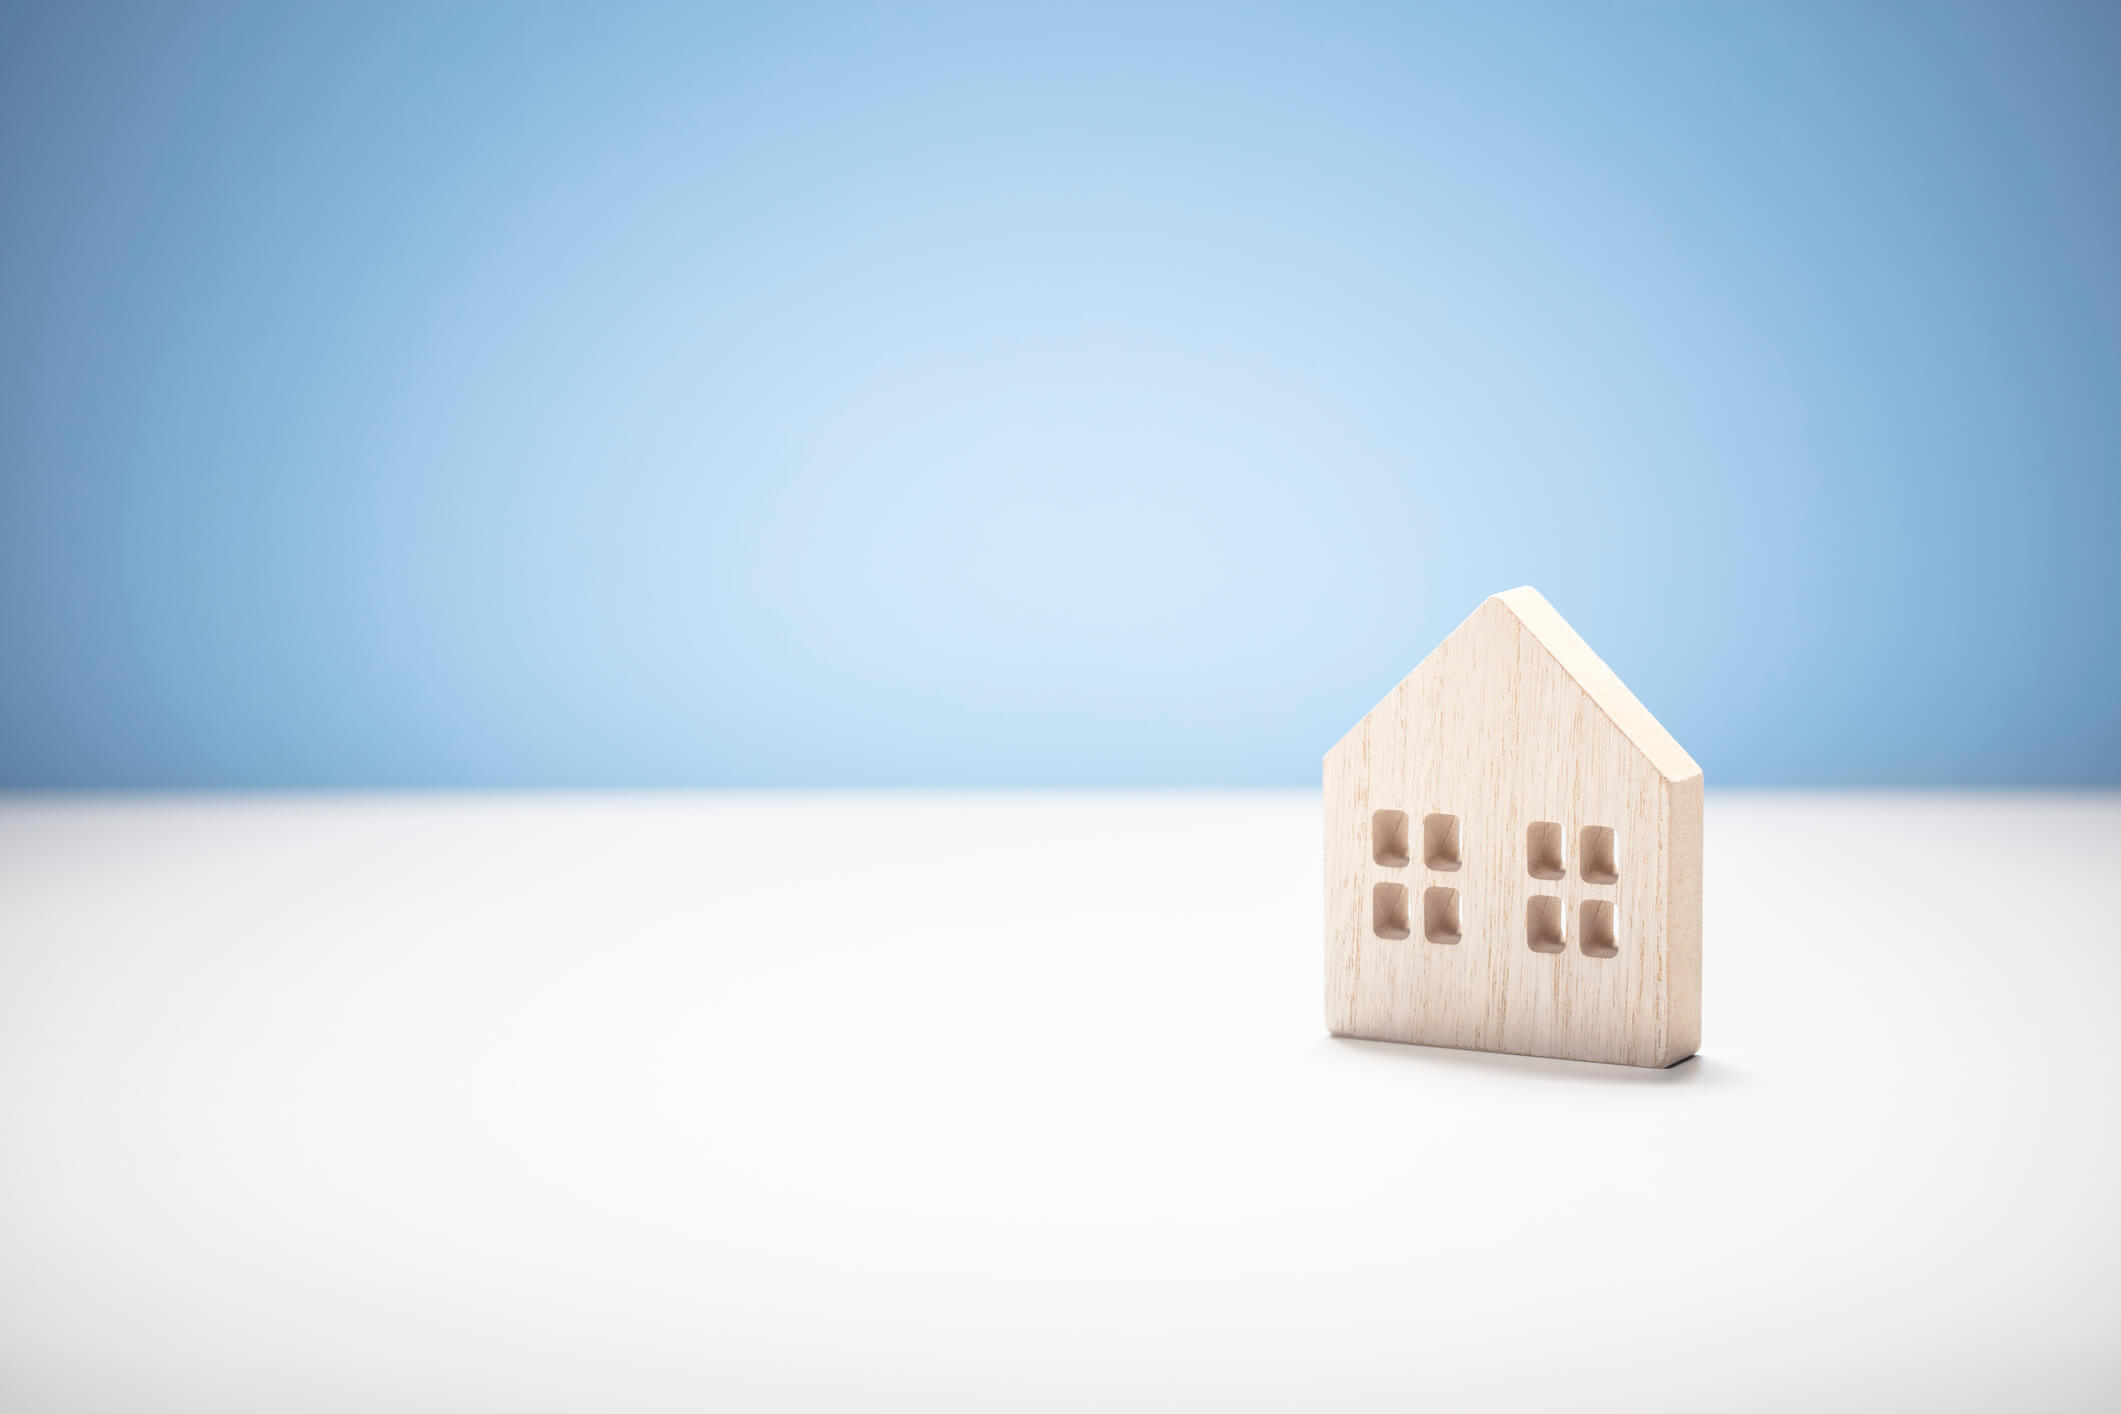 wooden model house on blue and white background